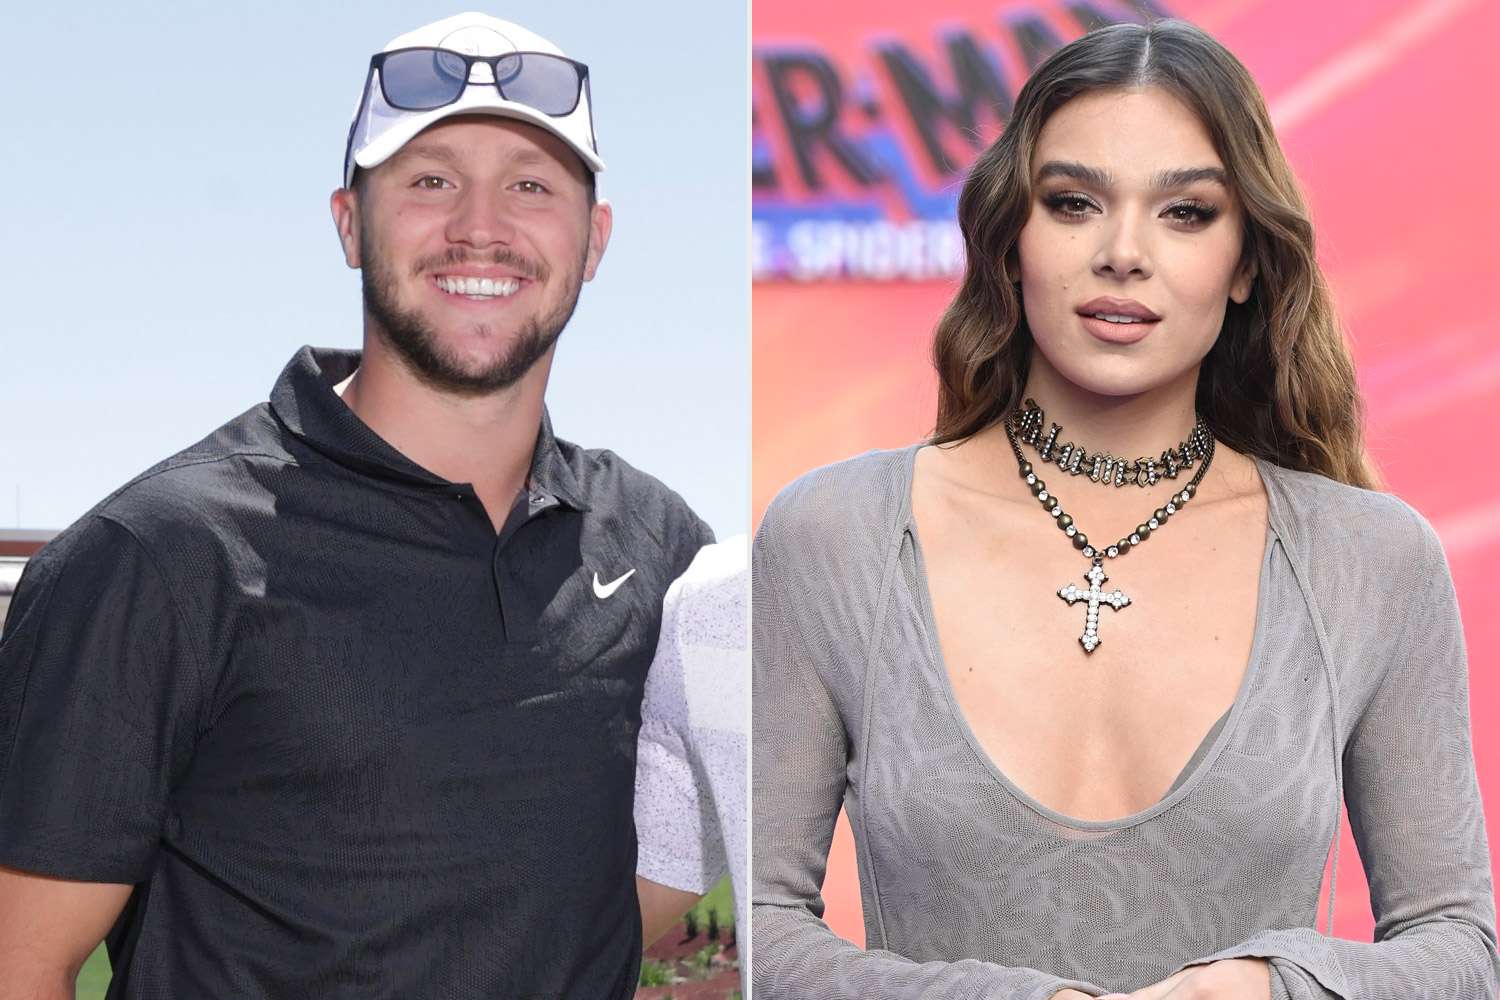 Josh Allen Spotted On Date With Hailee Steinfeld During NFL’s Championship Sunday